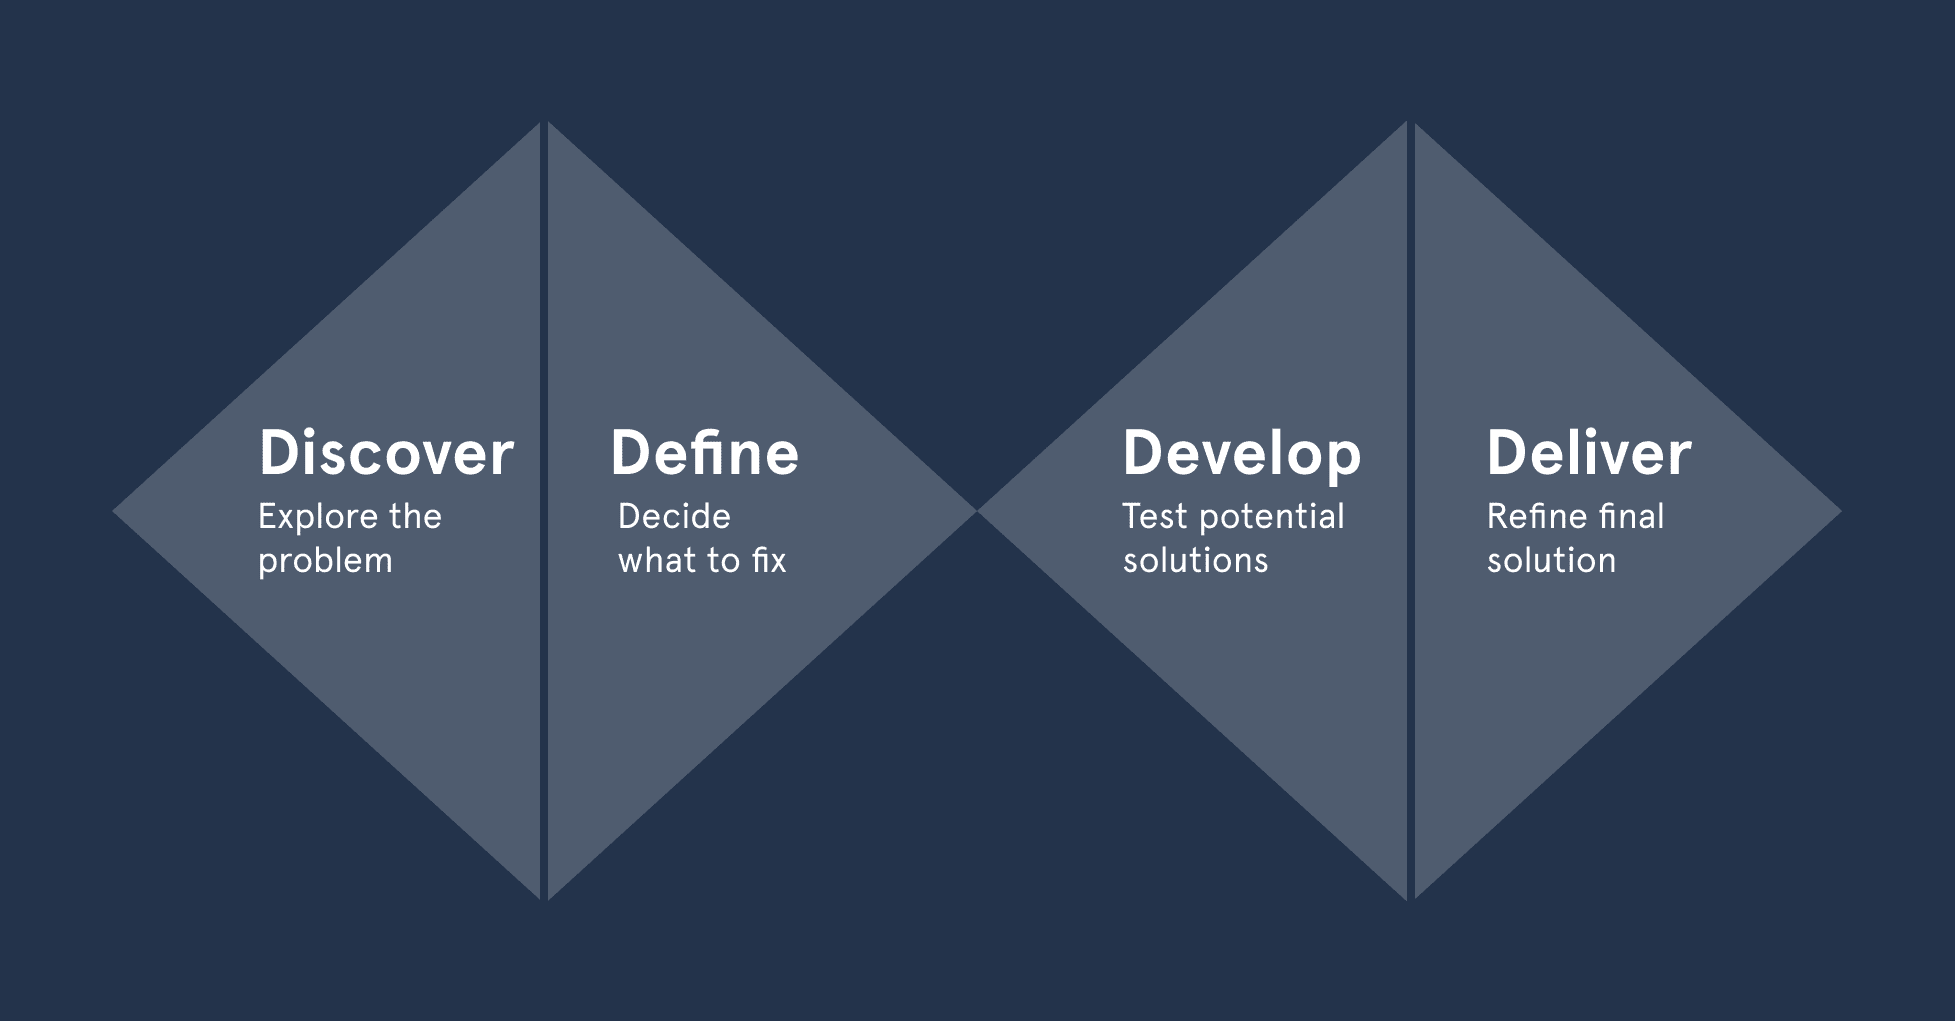 A diagram of the design process double diamond, showing the process of Discover, Define, Develop, and Design.